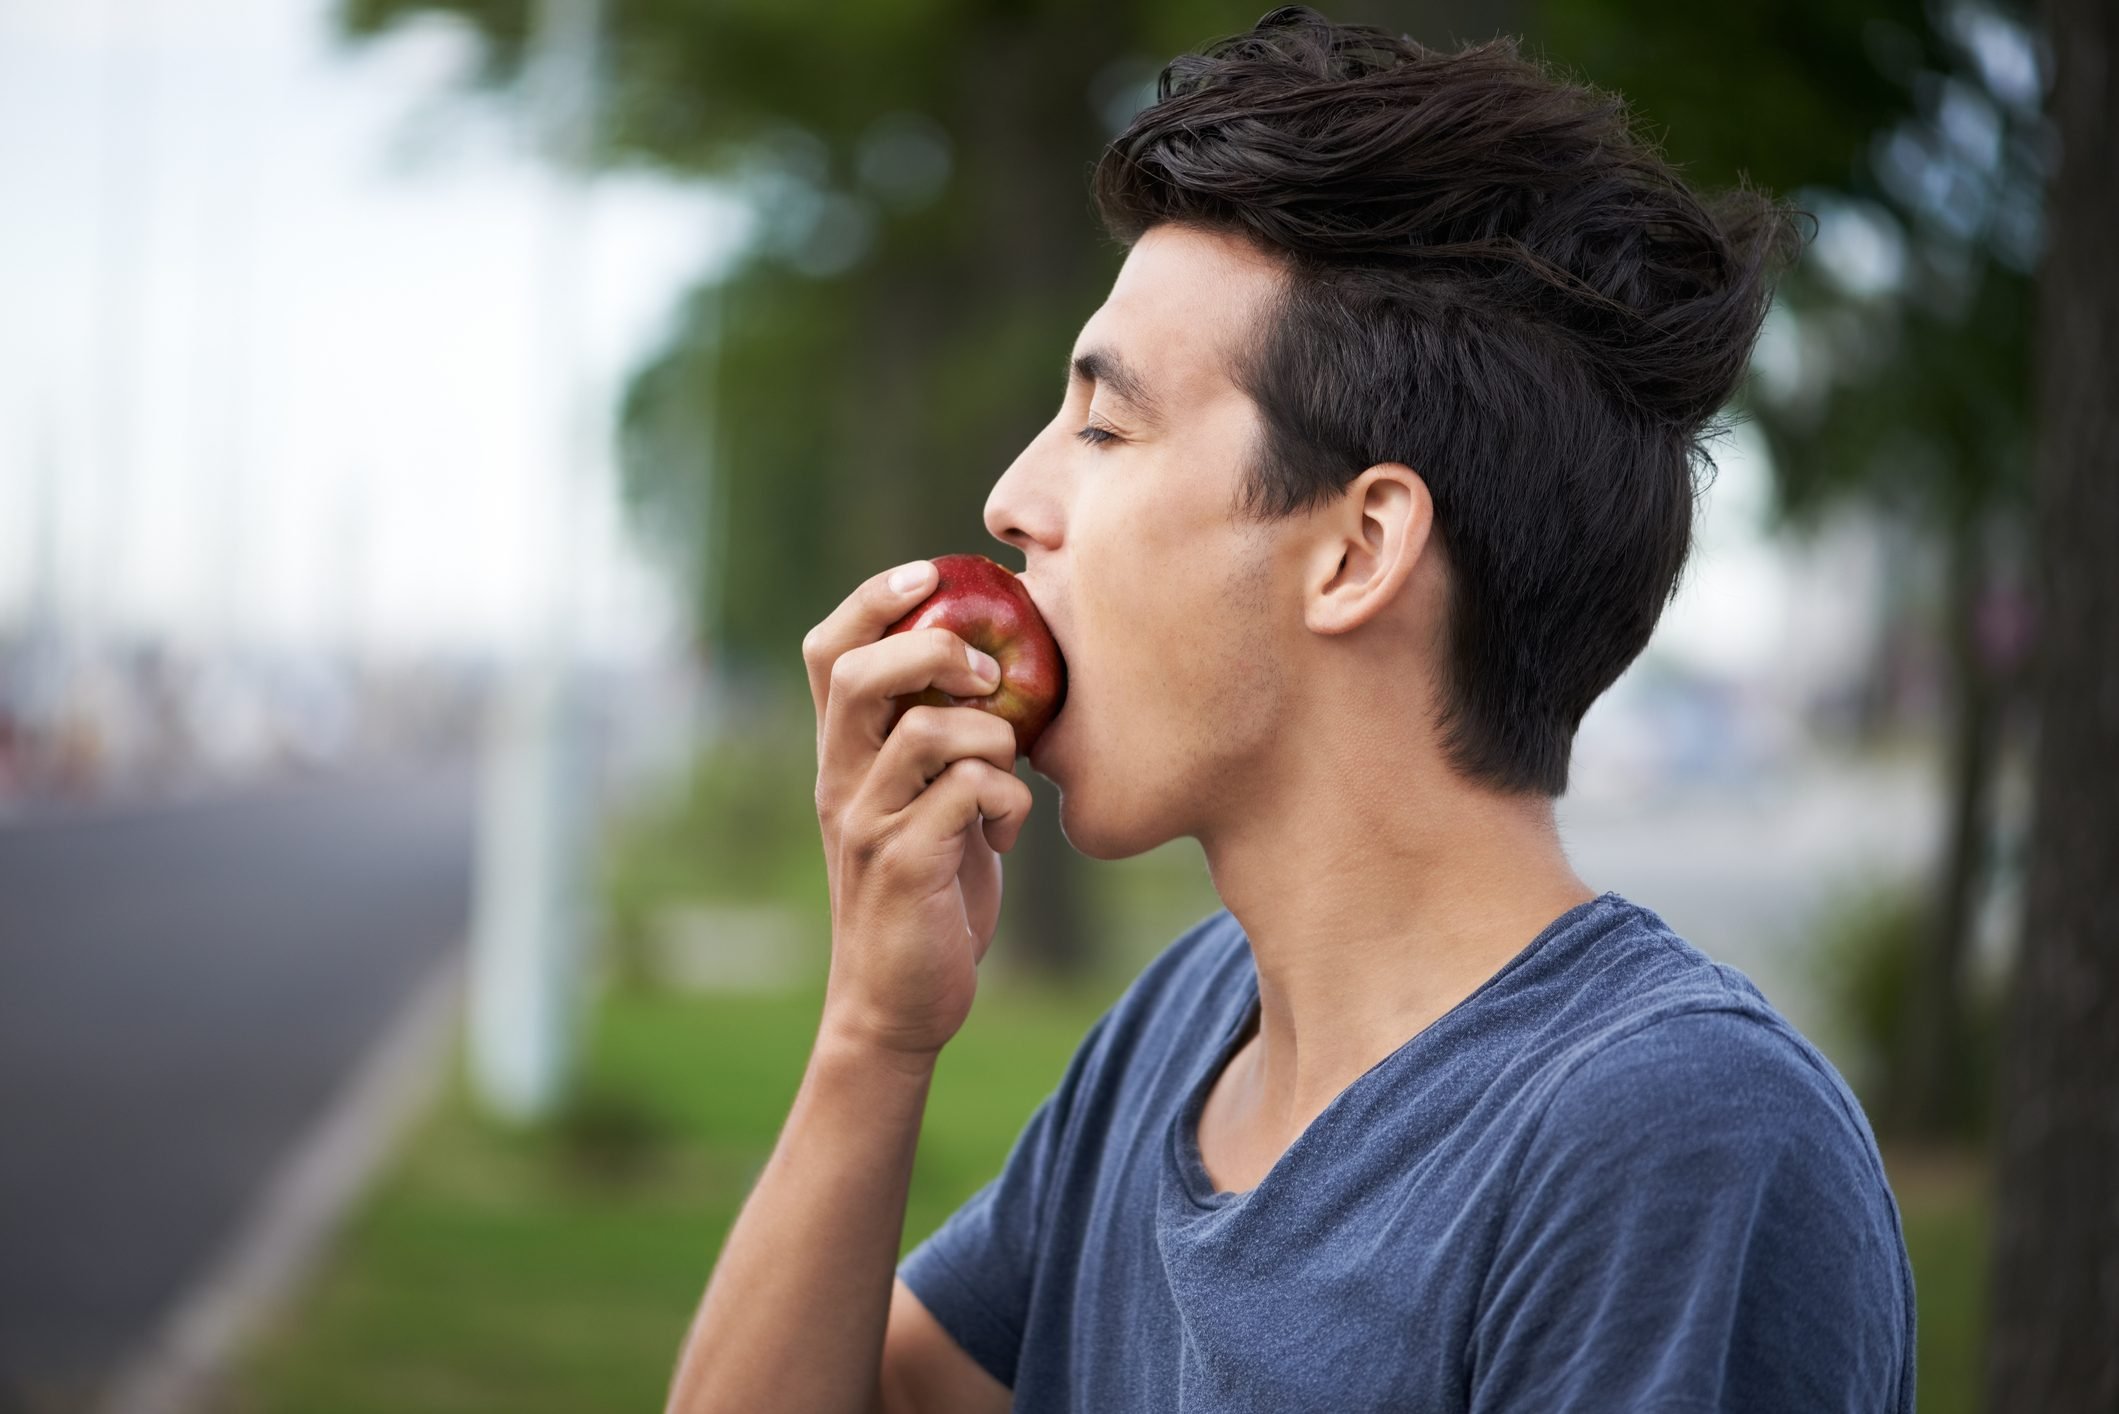 Snacks for People With Diabetes: 12 Expert Tips for Healthy Snacking